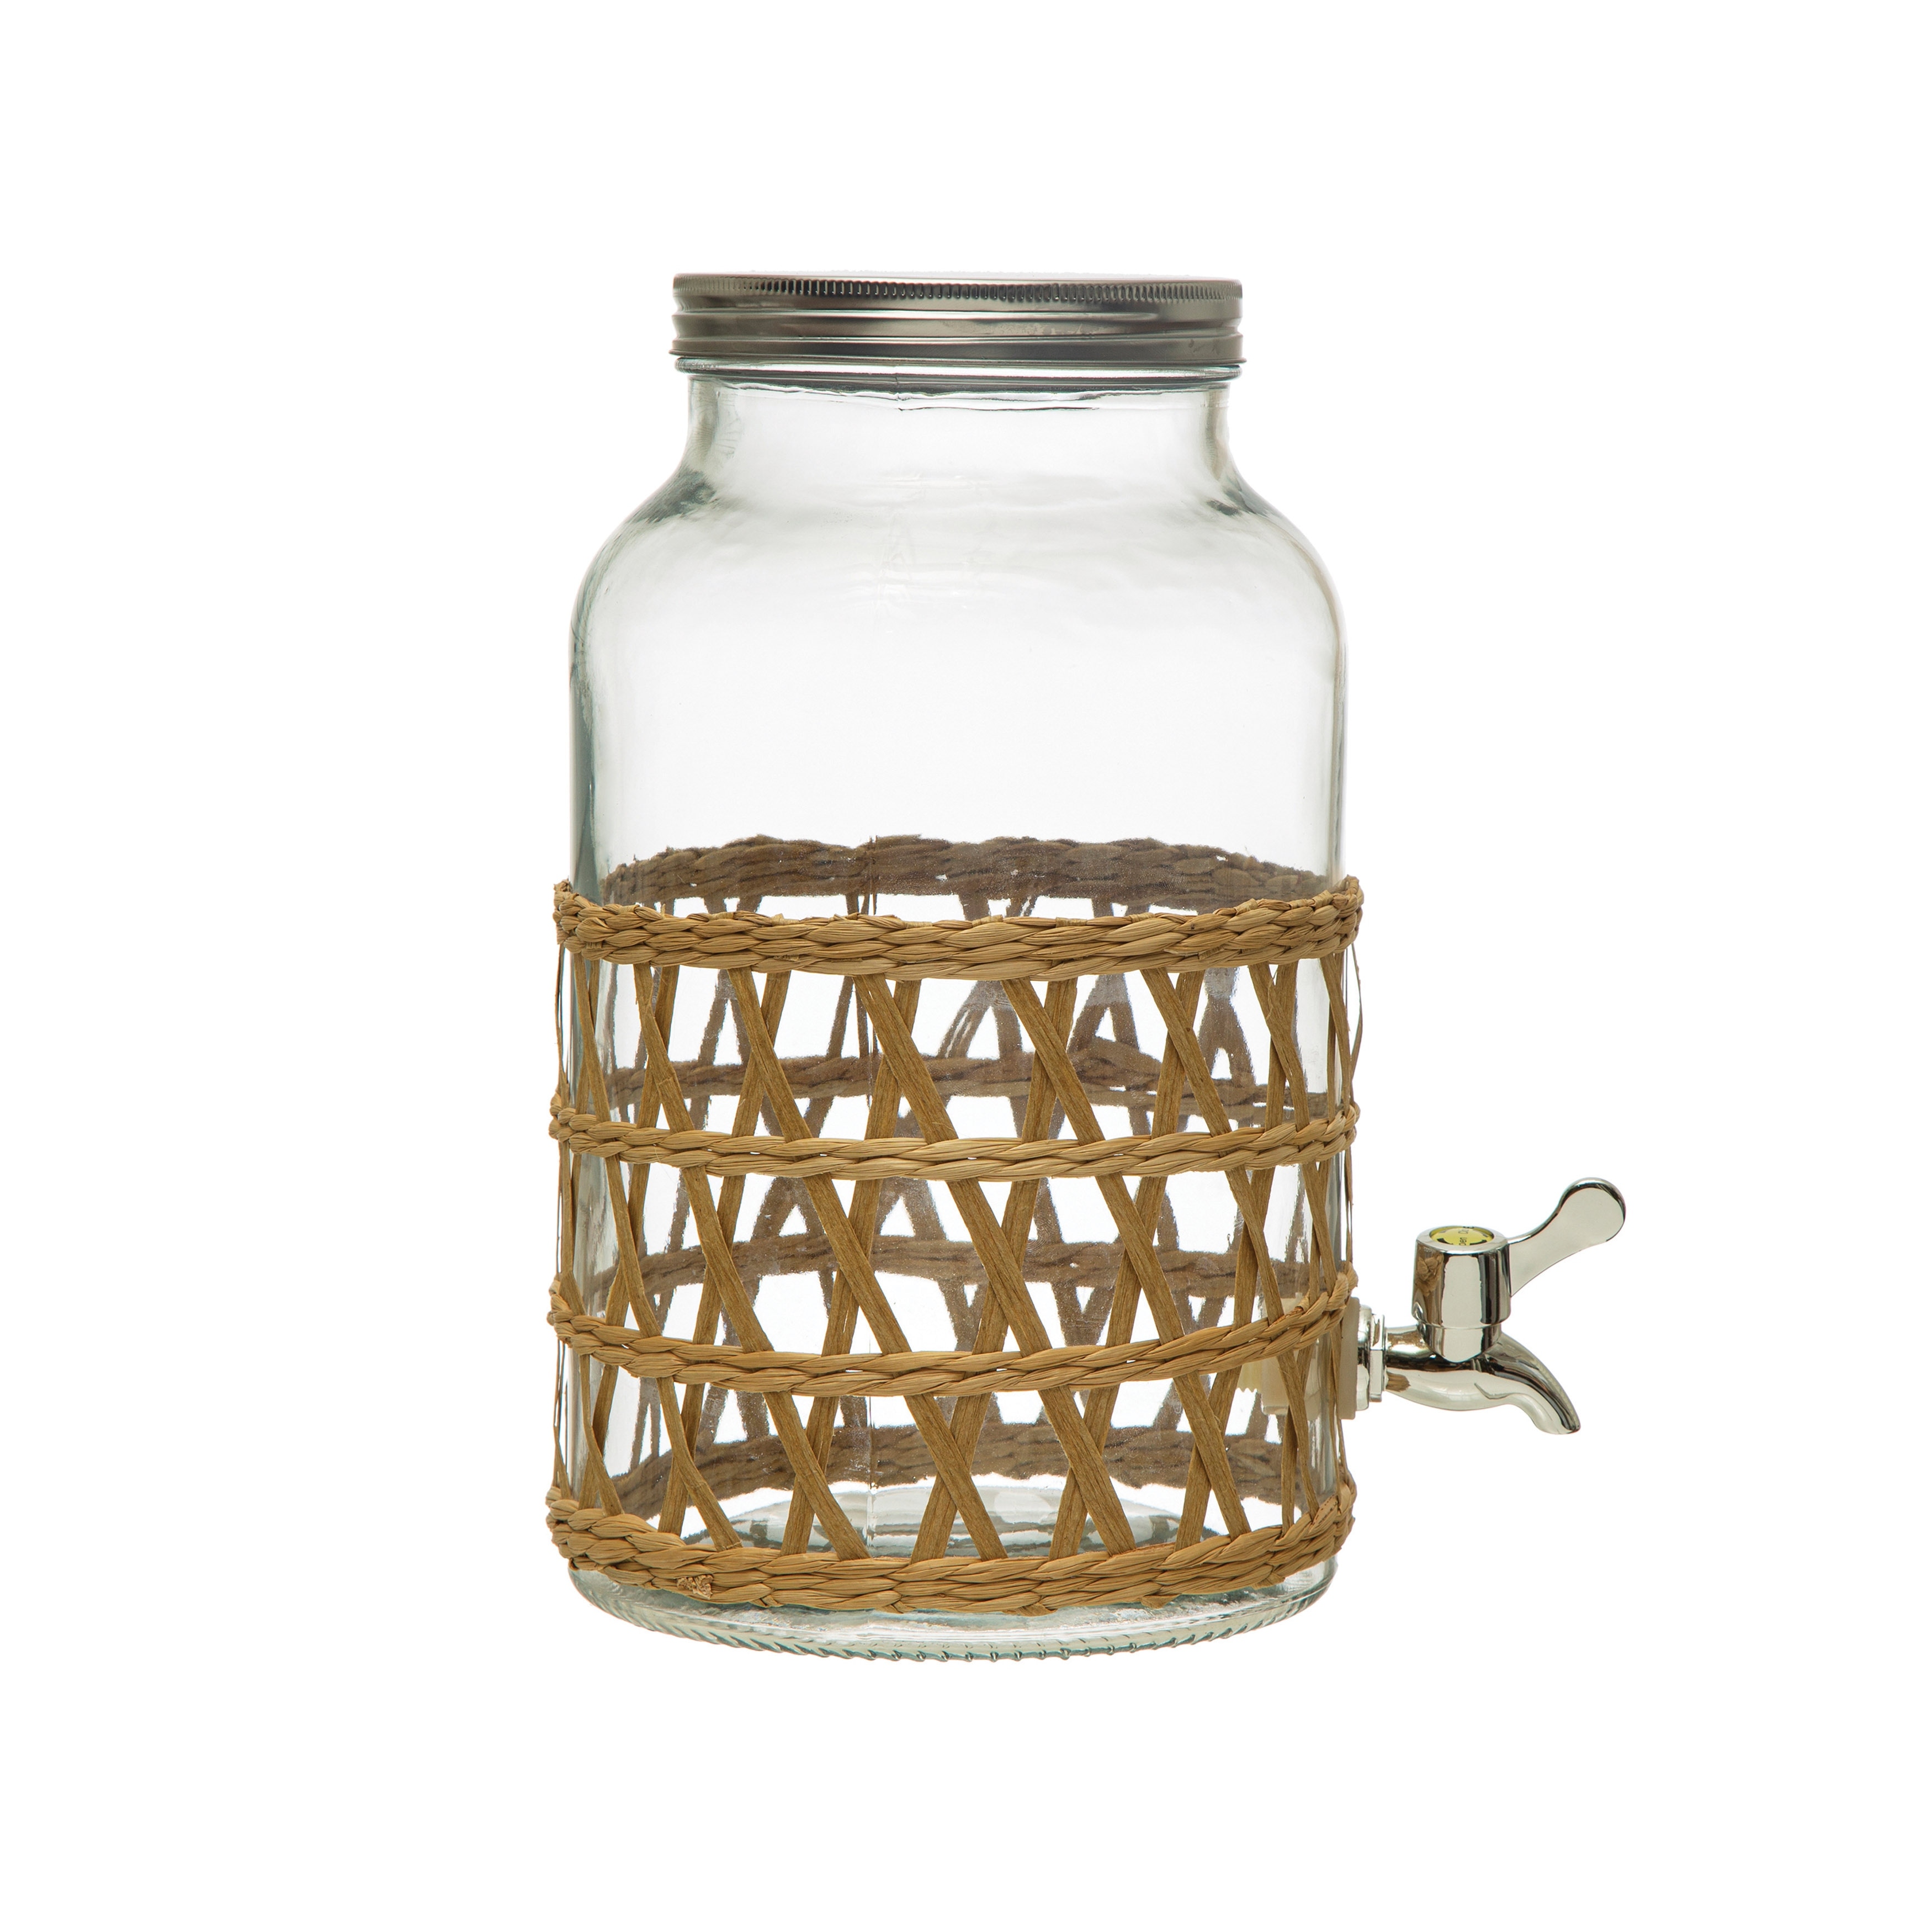 https://ak1.ostkcdn.com/images/products/is/images/direct/1c47eedd5ed646f19a188963740ad6b17277d37e/Glass-Jar-Beverage-Dispenser-with-Woven-Seagrass-Sleeve.jpg